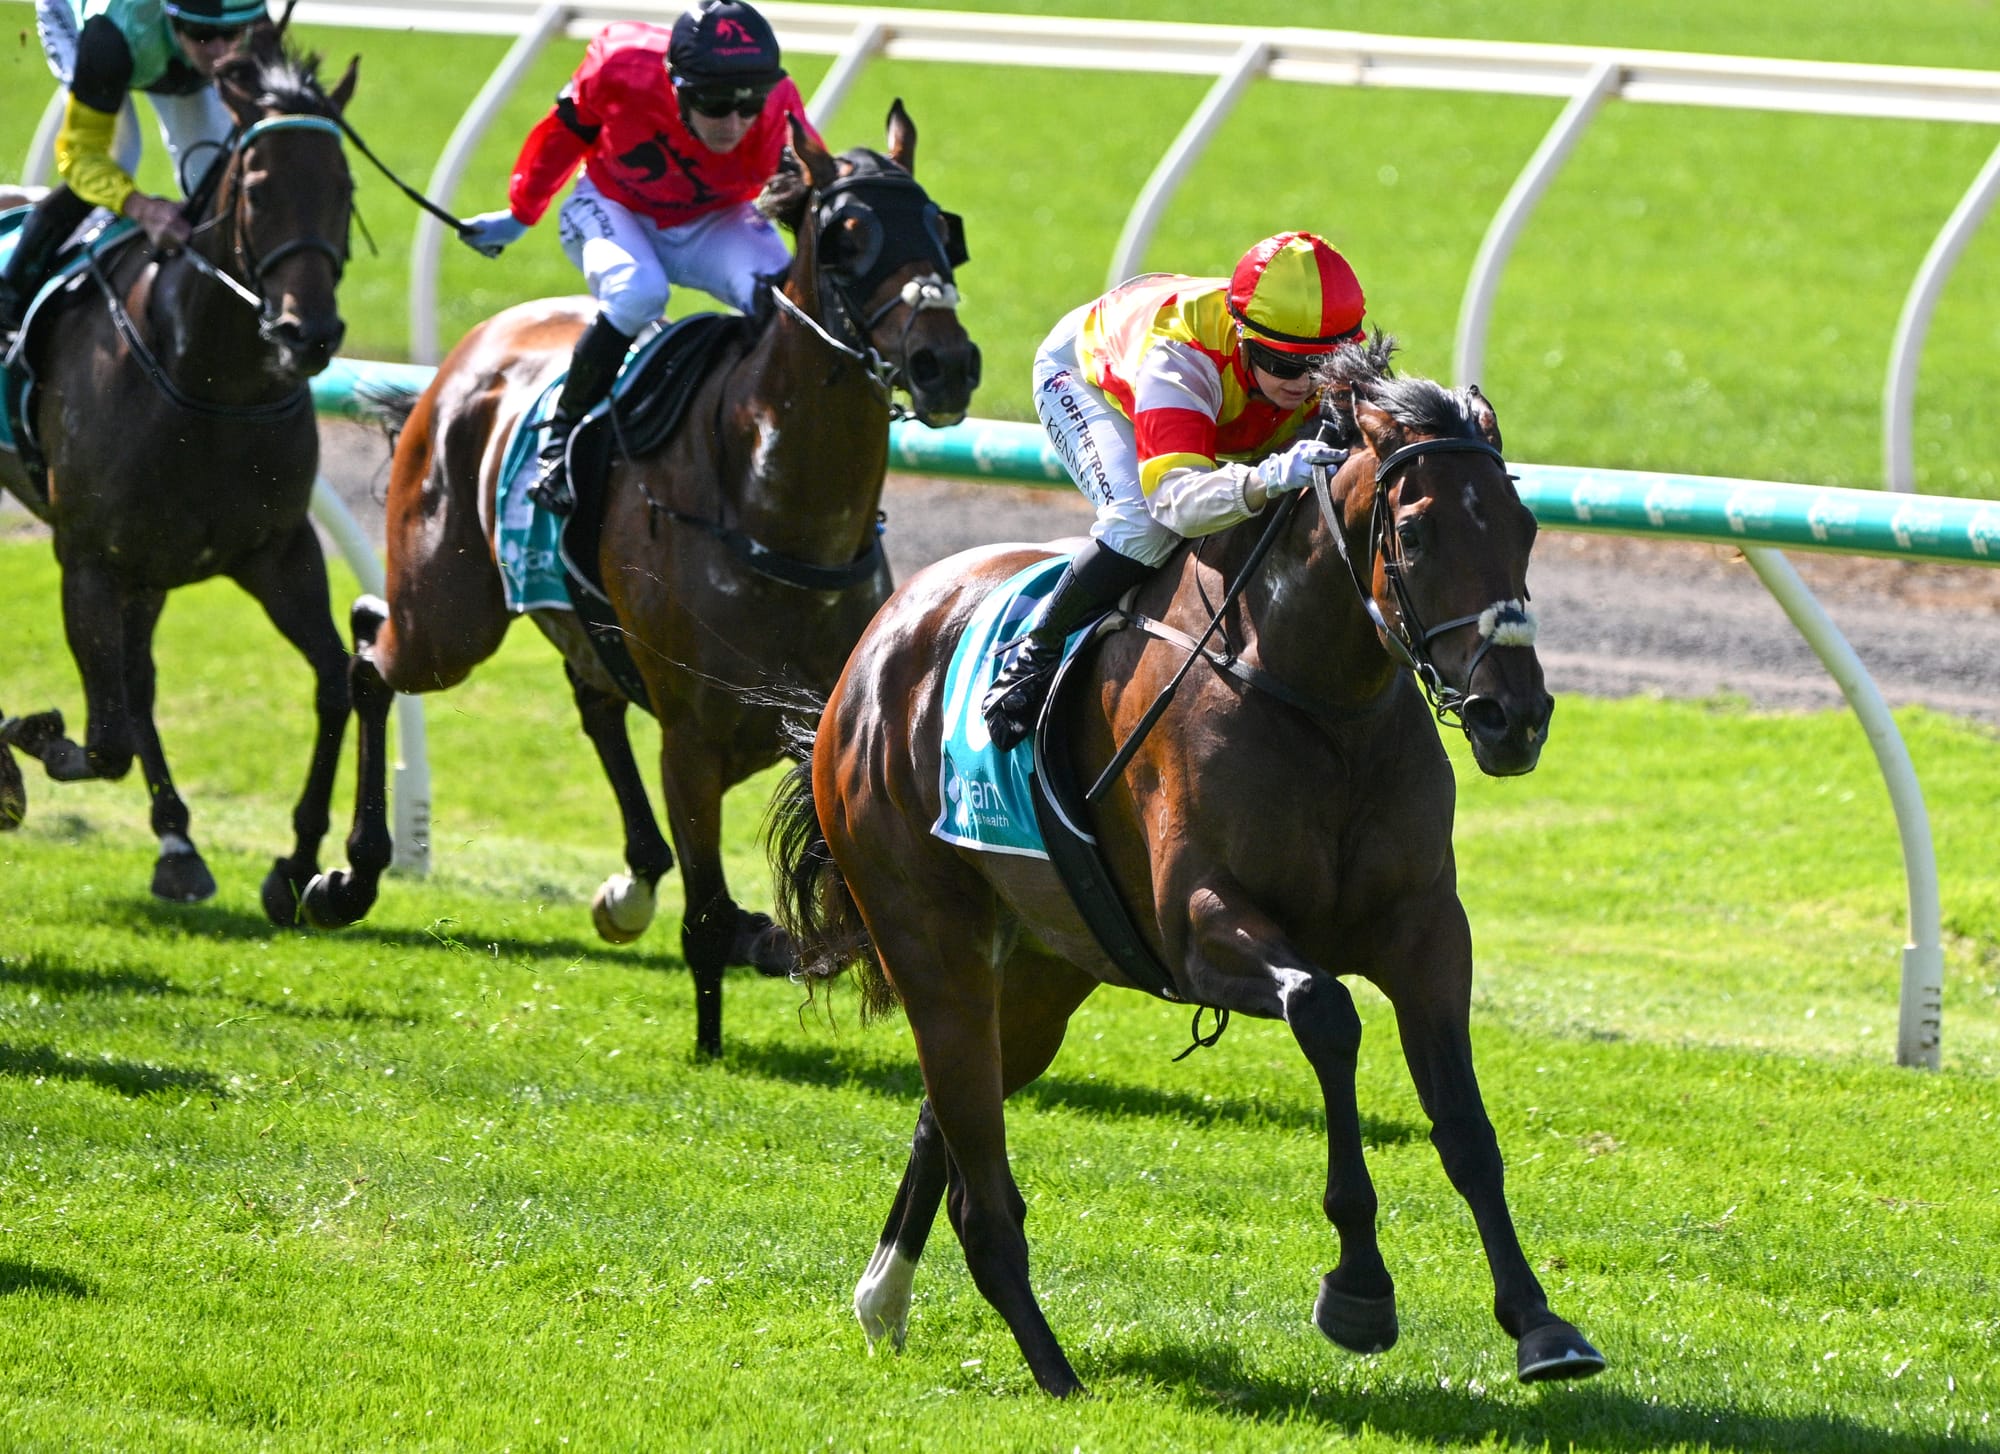 Coco Sun was too strong in the Group 1 South Australian Derby